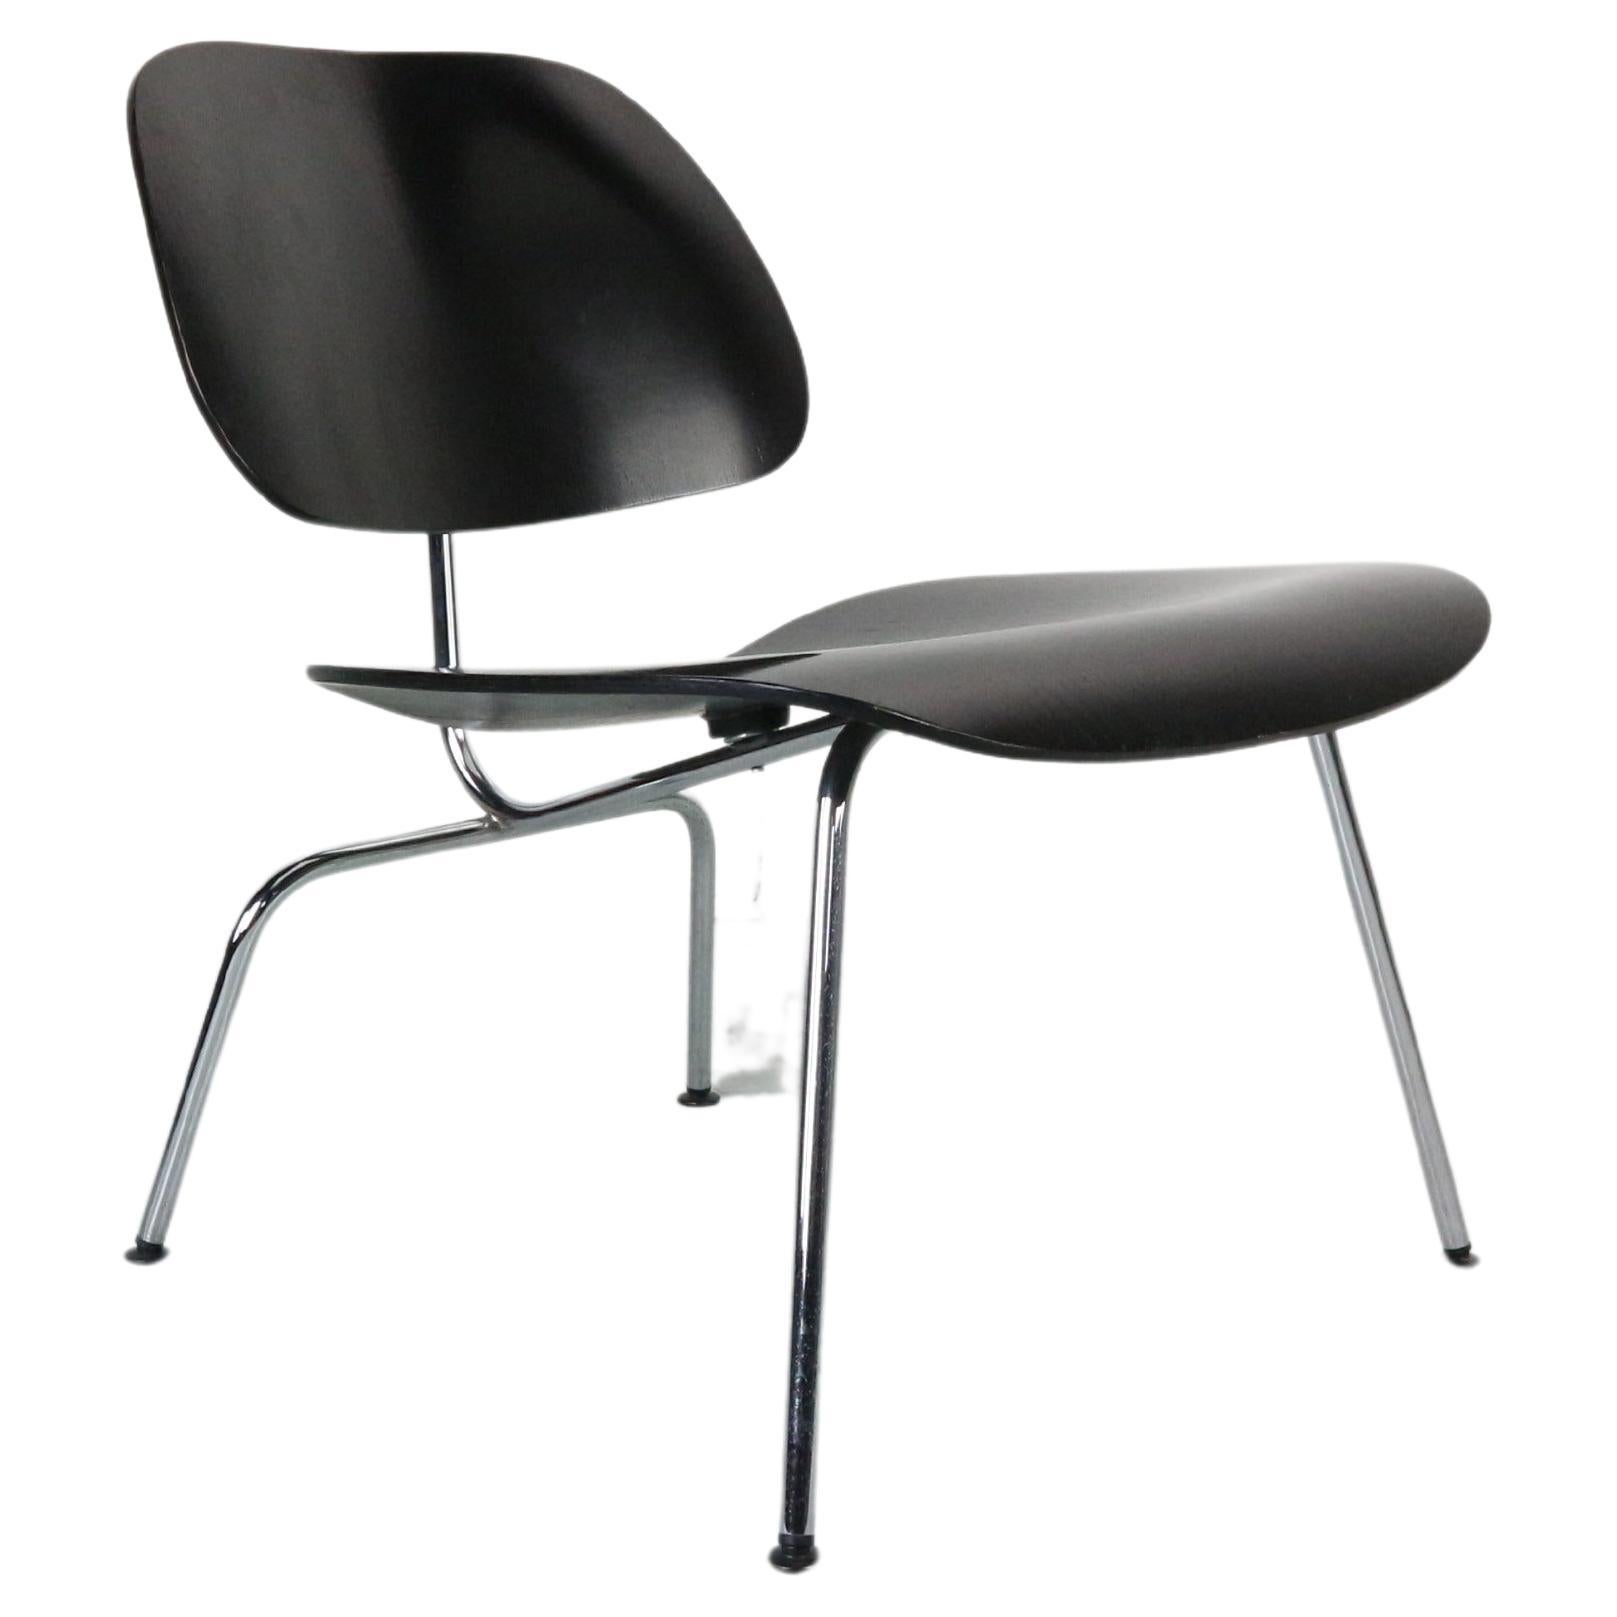 How is the Eames LCW (Lounge Chair Wood) made?